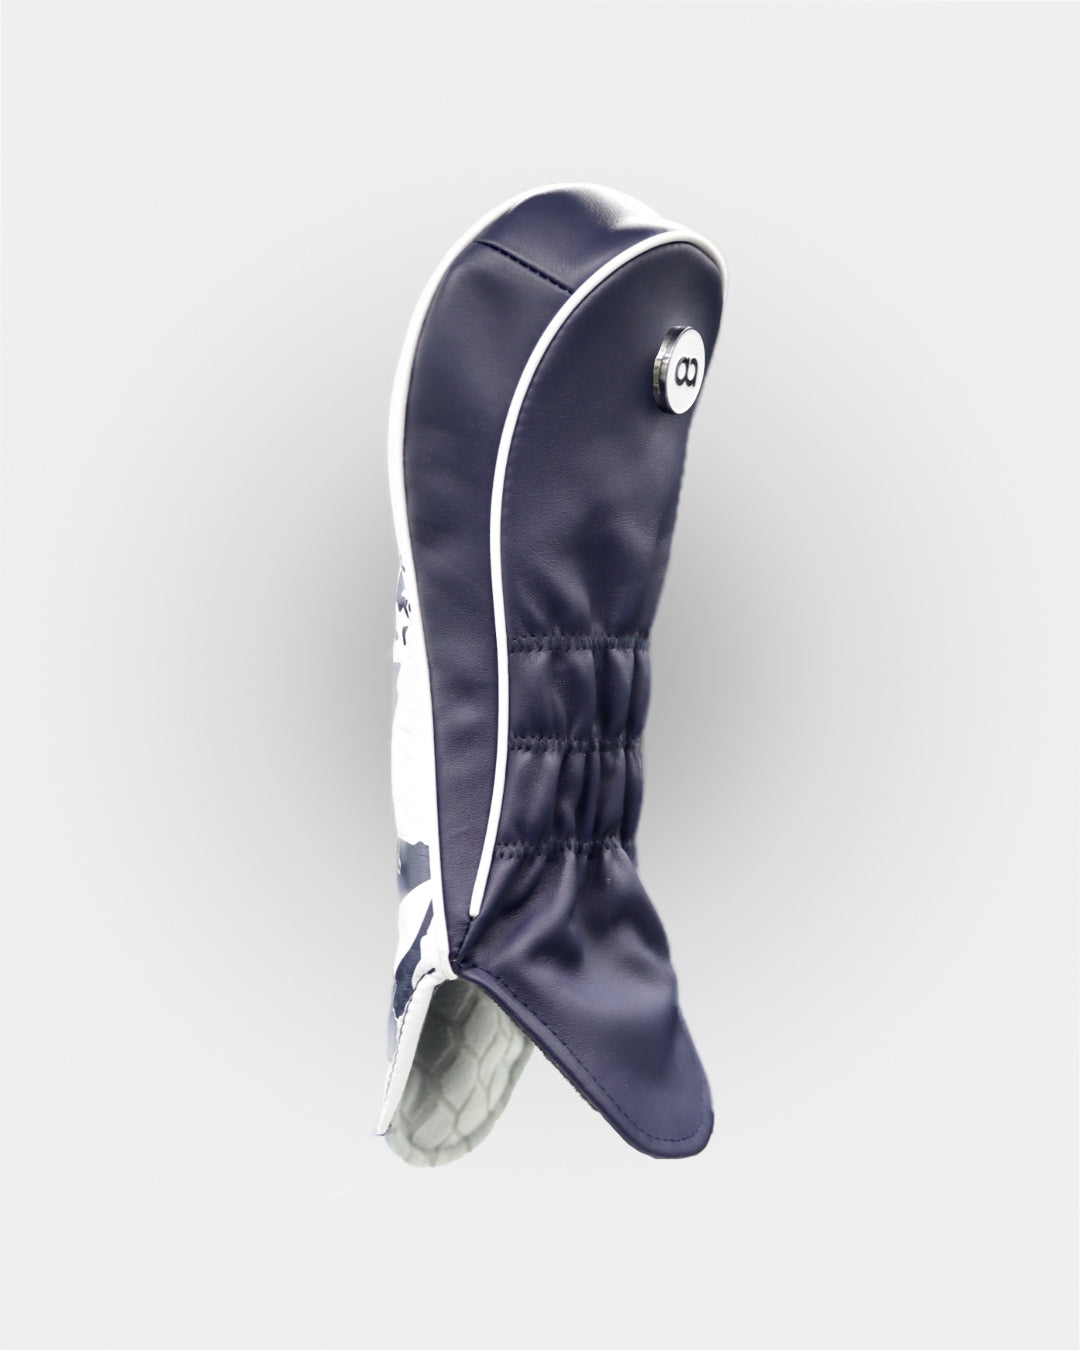 Scotland white and navy blue leather fairway wood headcover by David Alexander